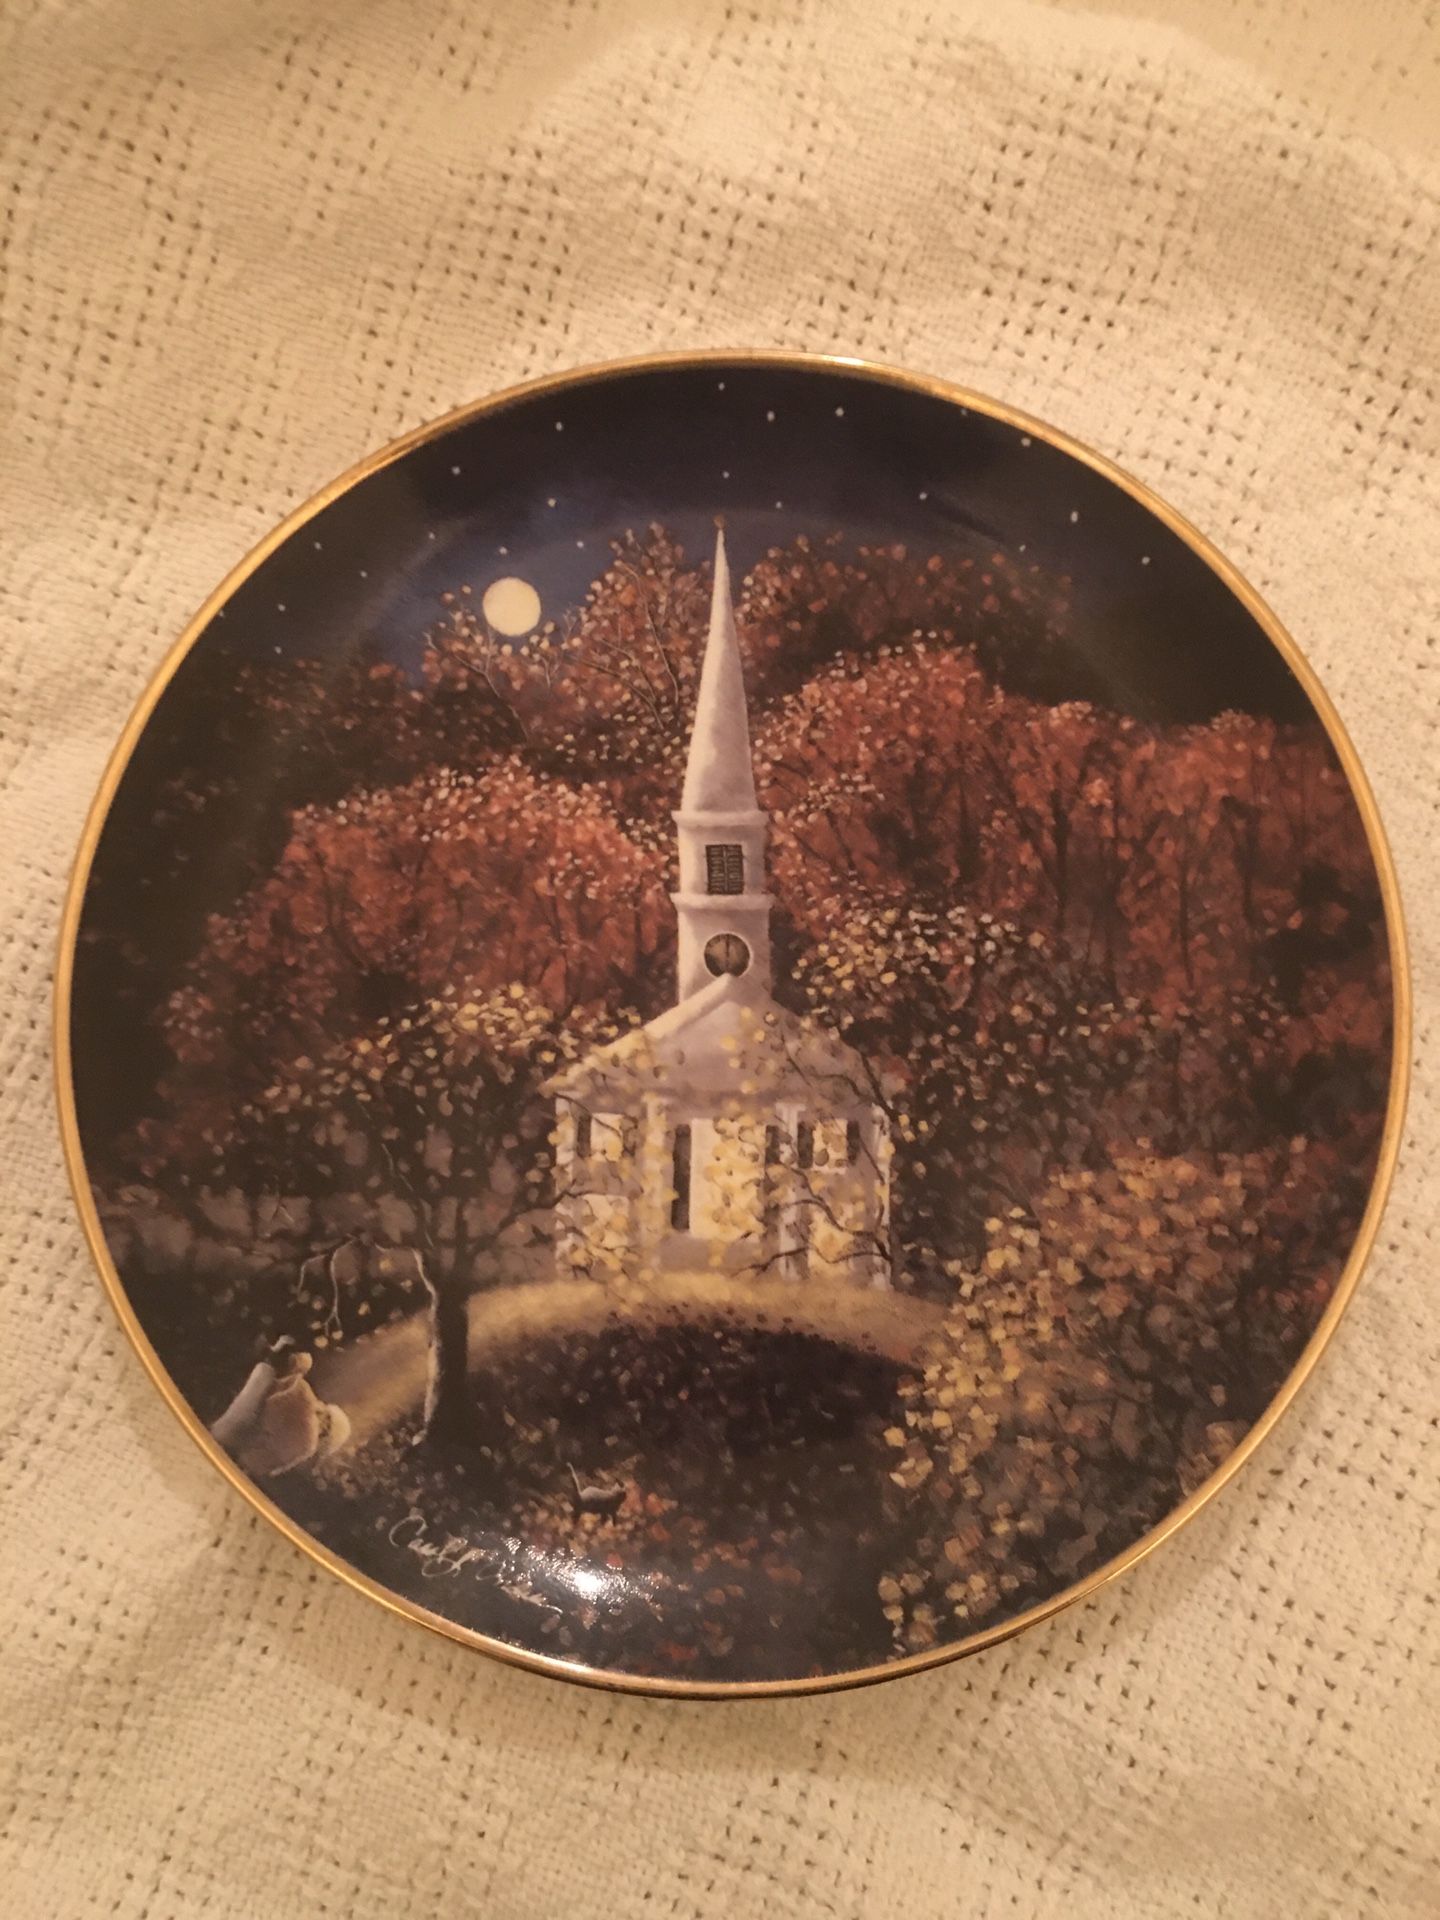 Franklin Mint, Chapel Visitors limited edition plate